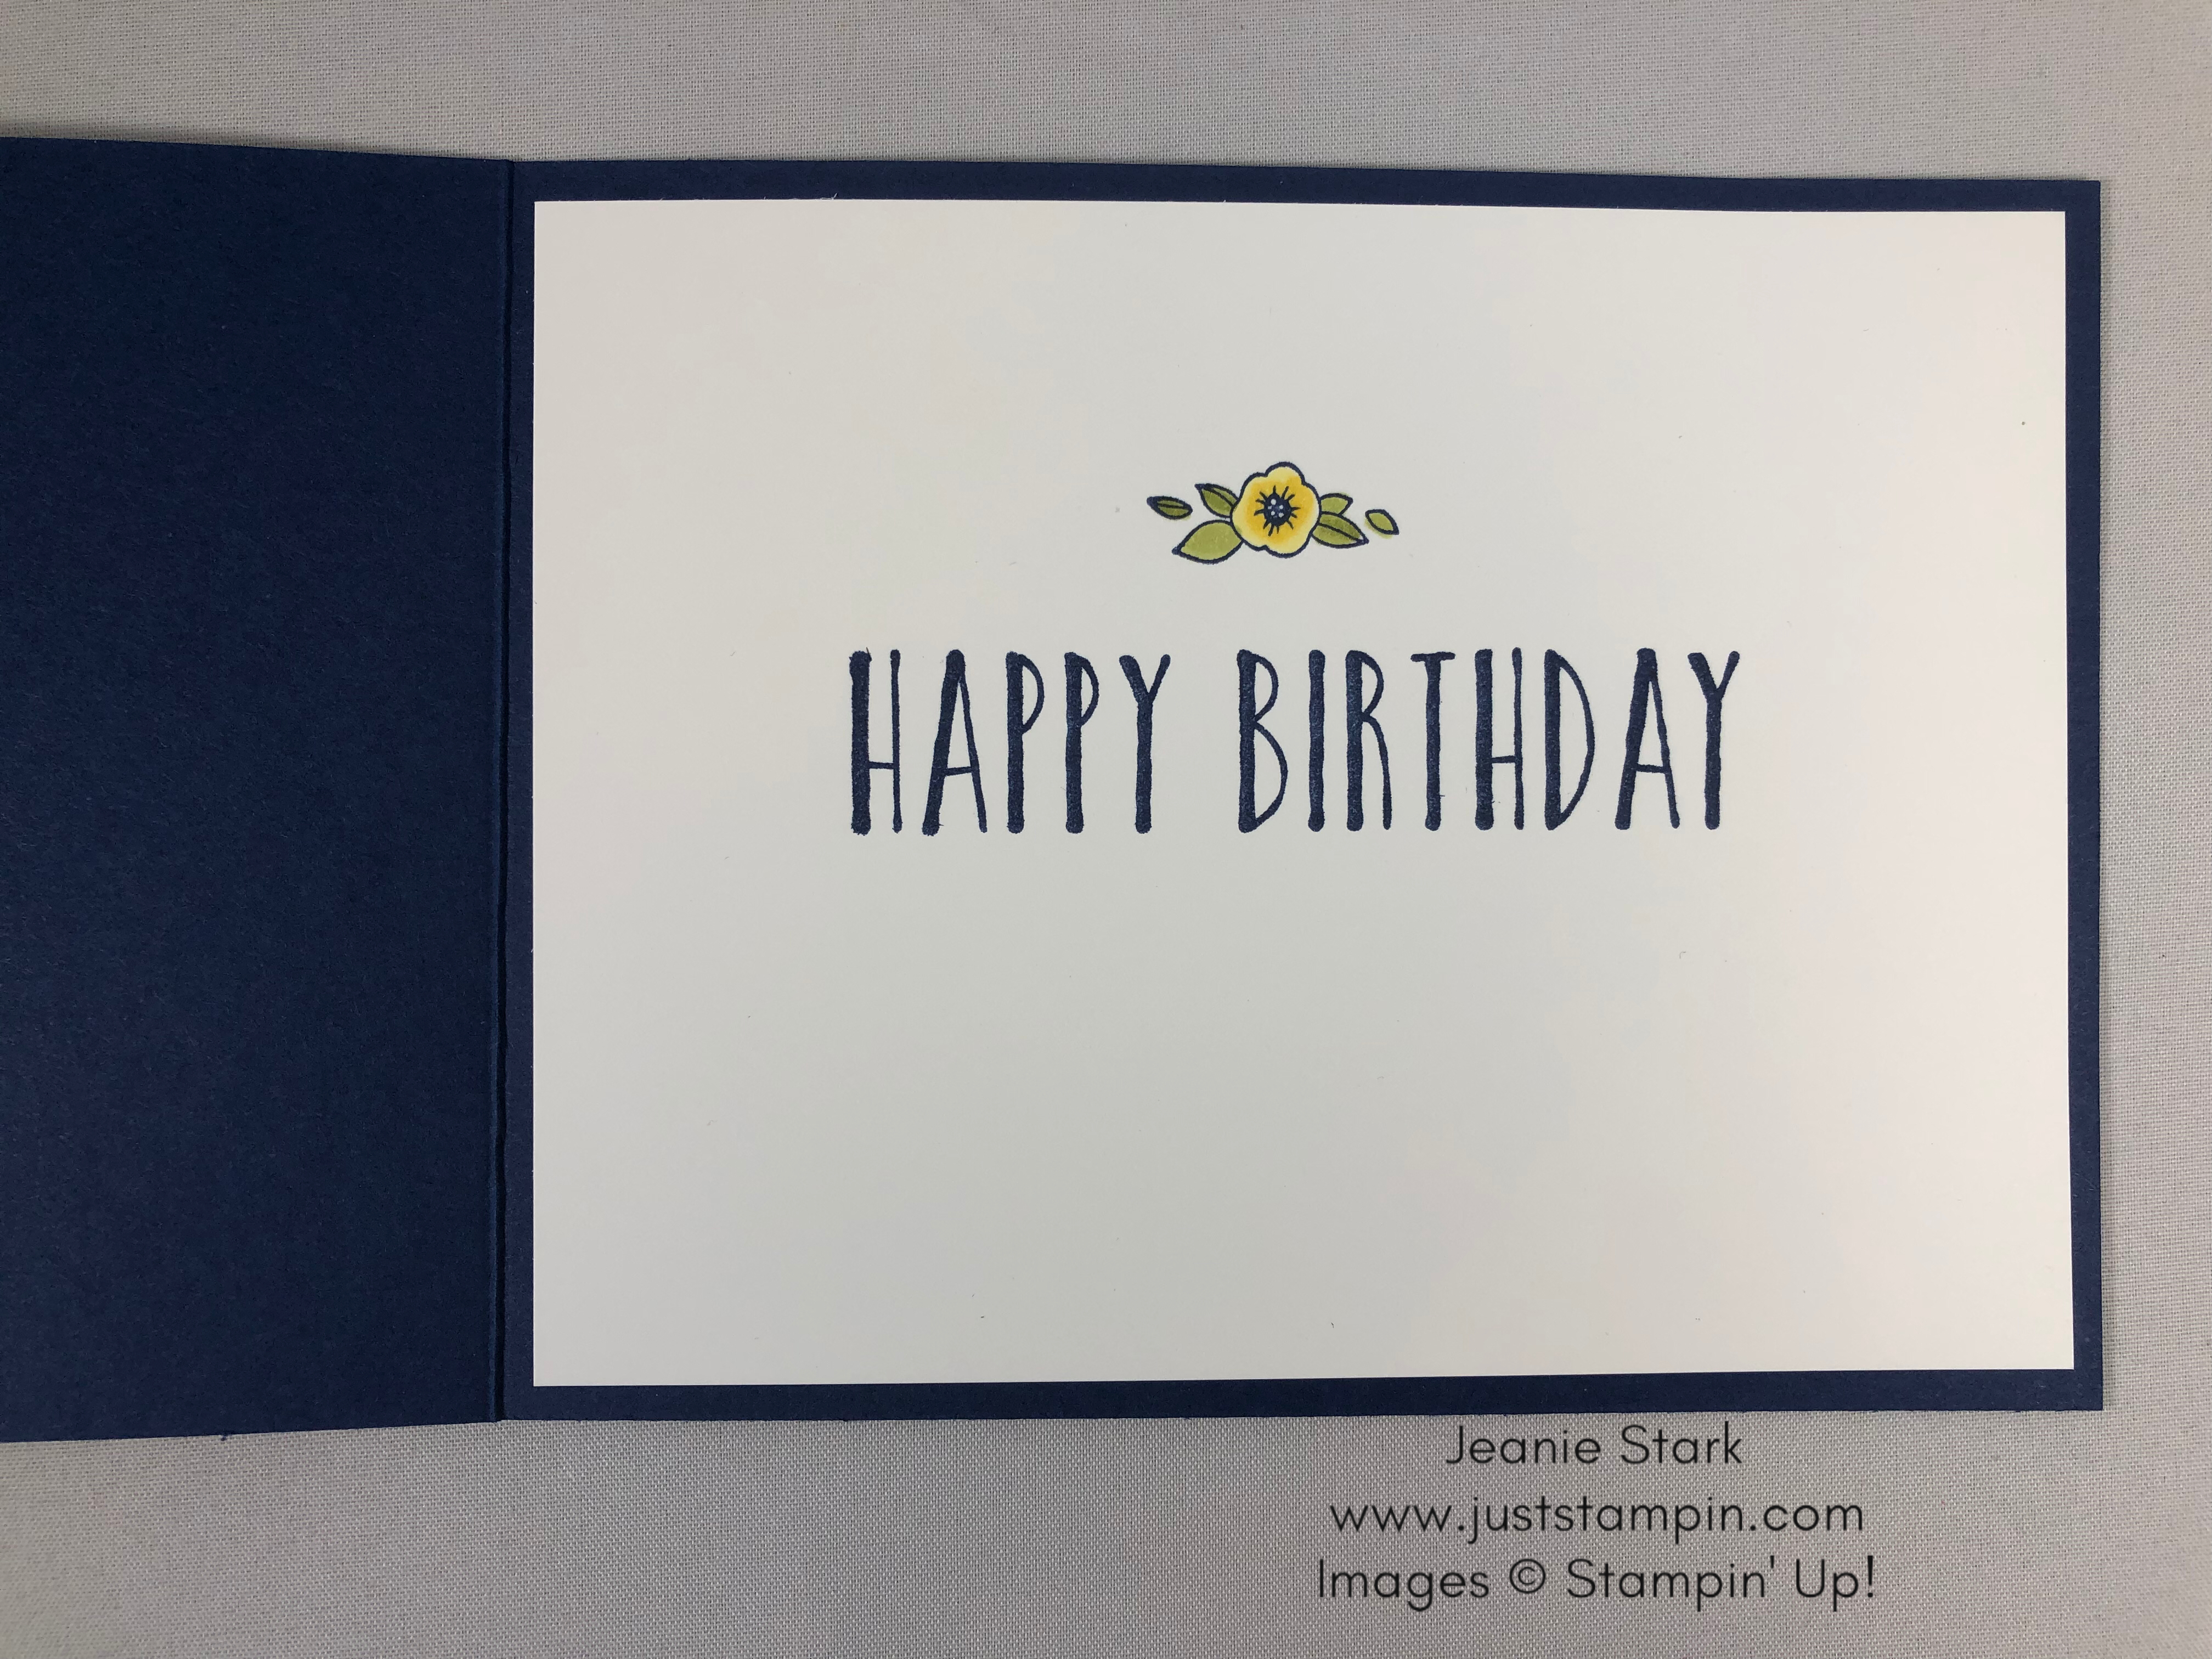 Stampin Up Perennial Birthday and Accented Blooms birthday card idea - Jeanie Stark StampinUp